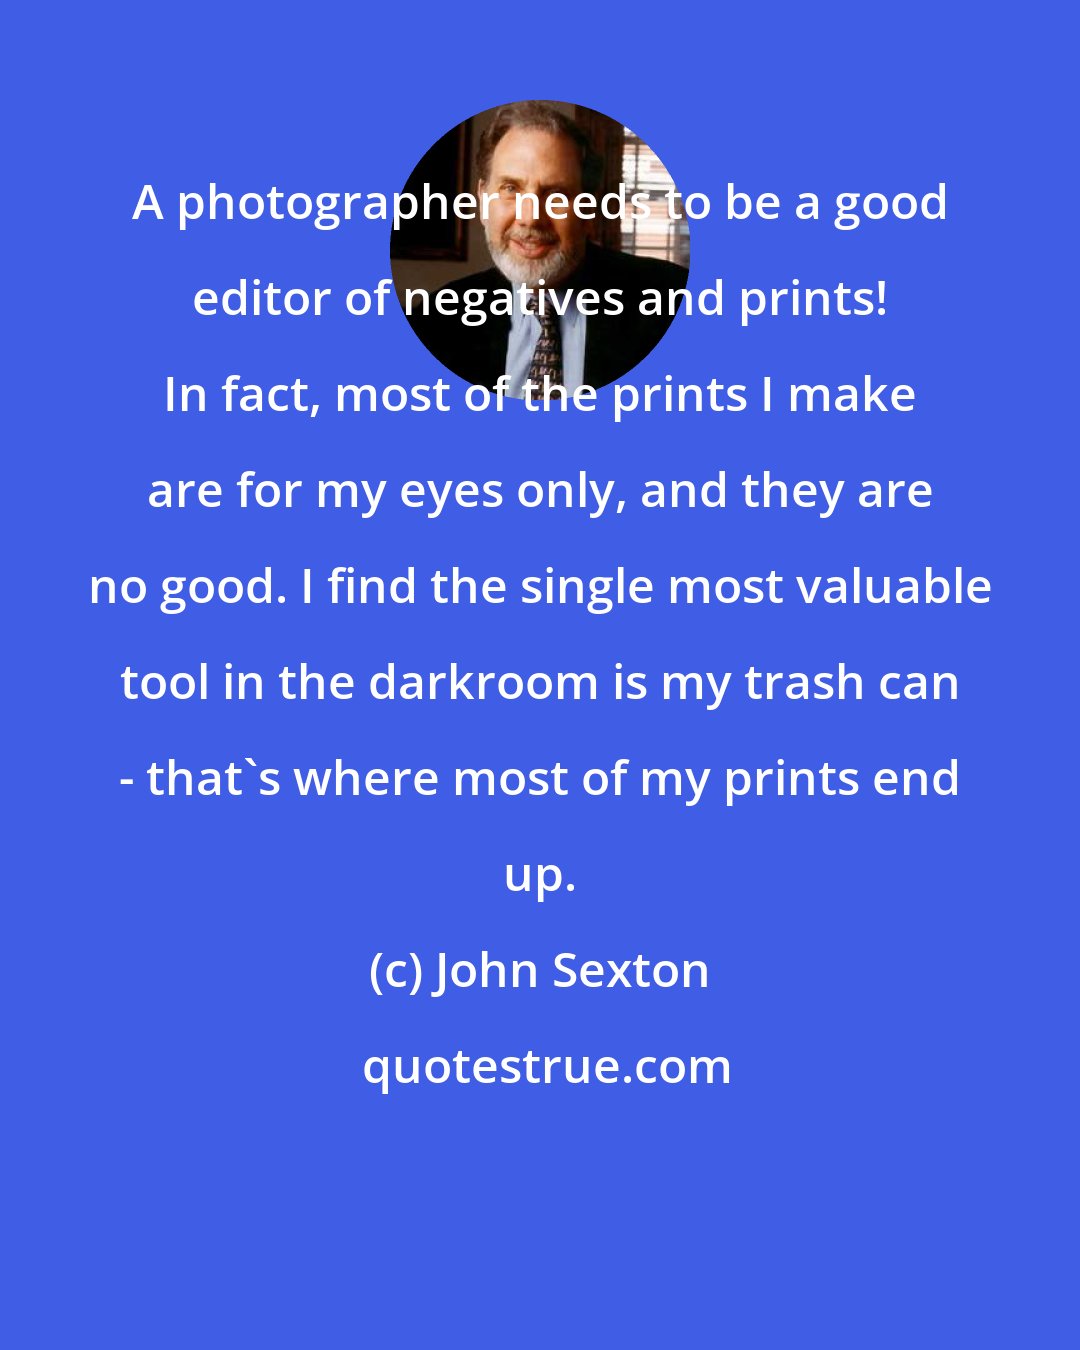 John Sexton: A photographer needs to be a good editor of negatives and prints! In fact, most of the prints I make are for my eyes only, and they are no good. I find the single most valuable tool in the darkroom is my trash can - that's where most of my prints end up.